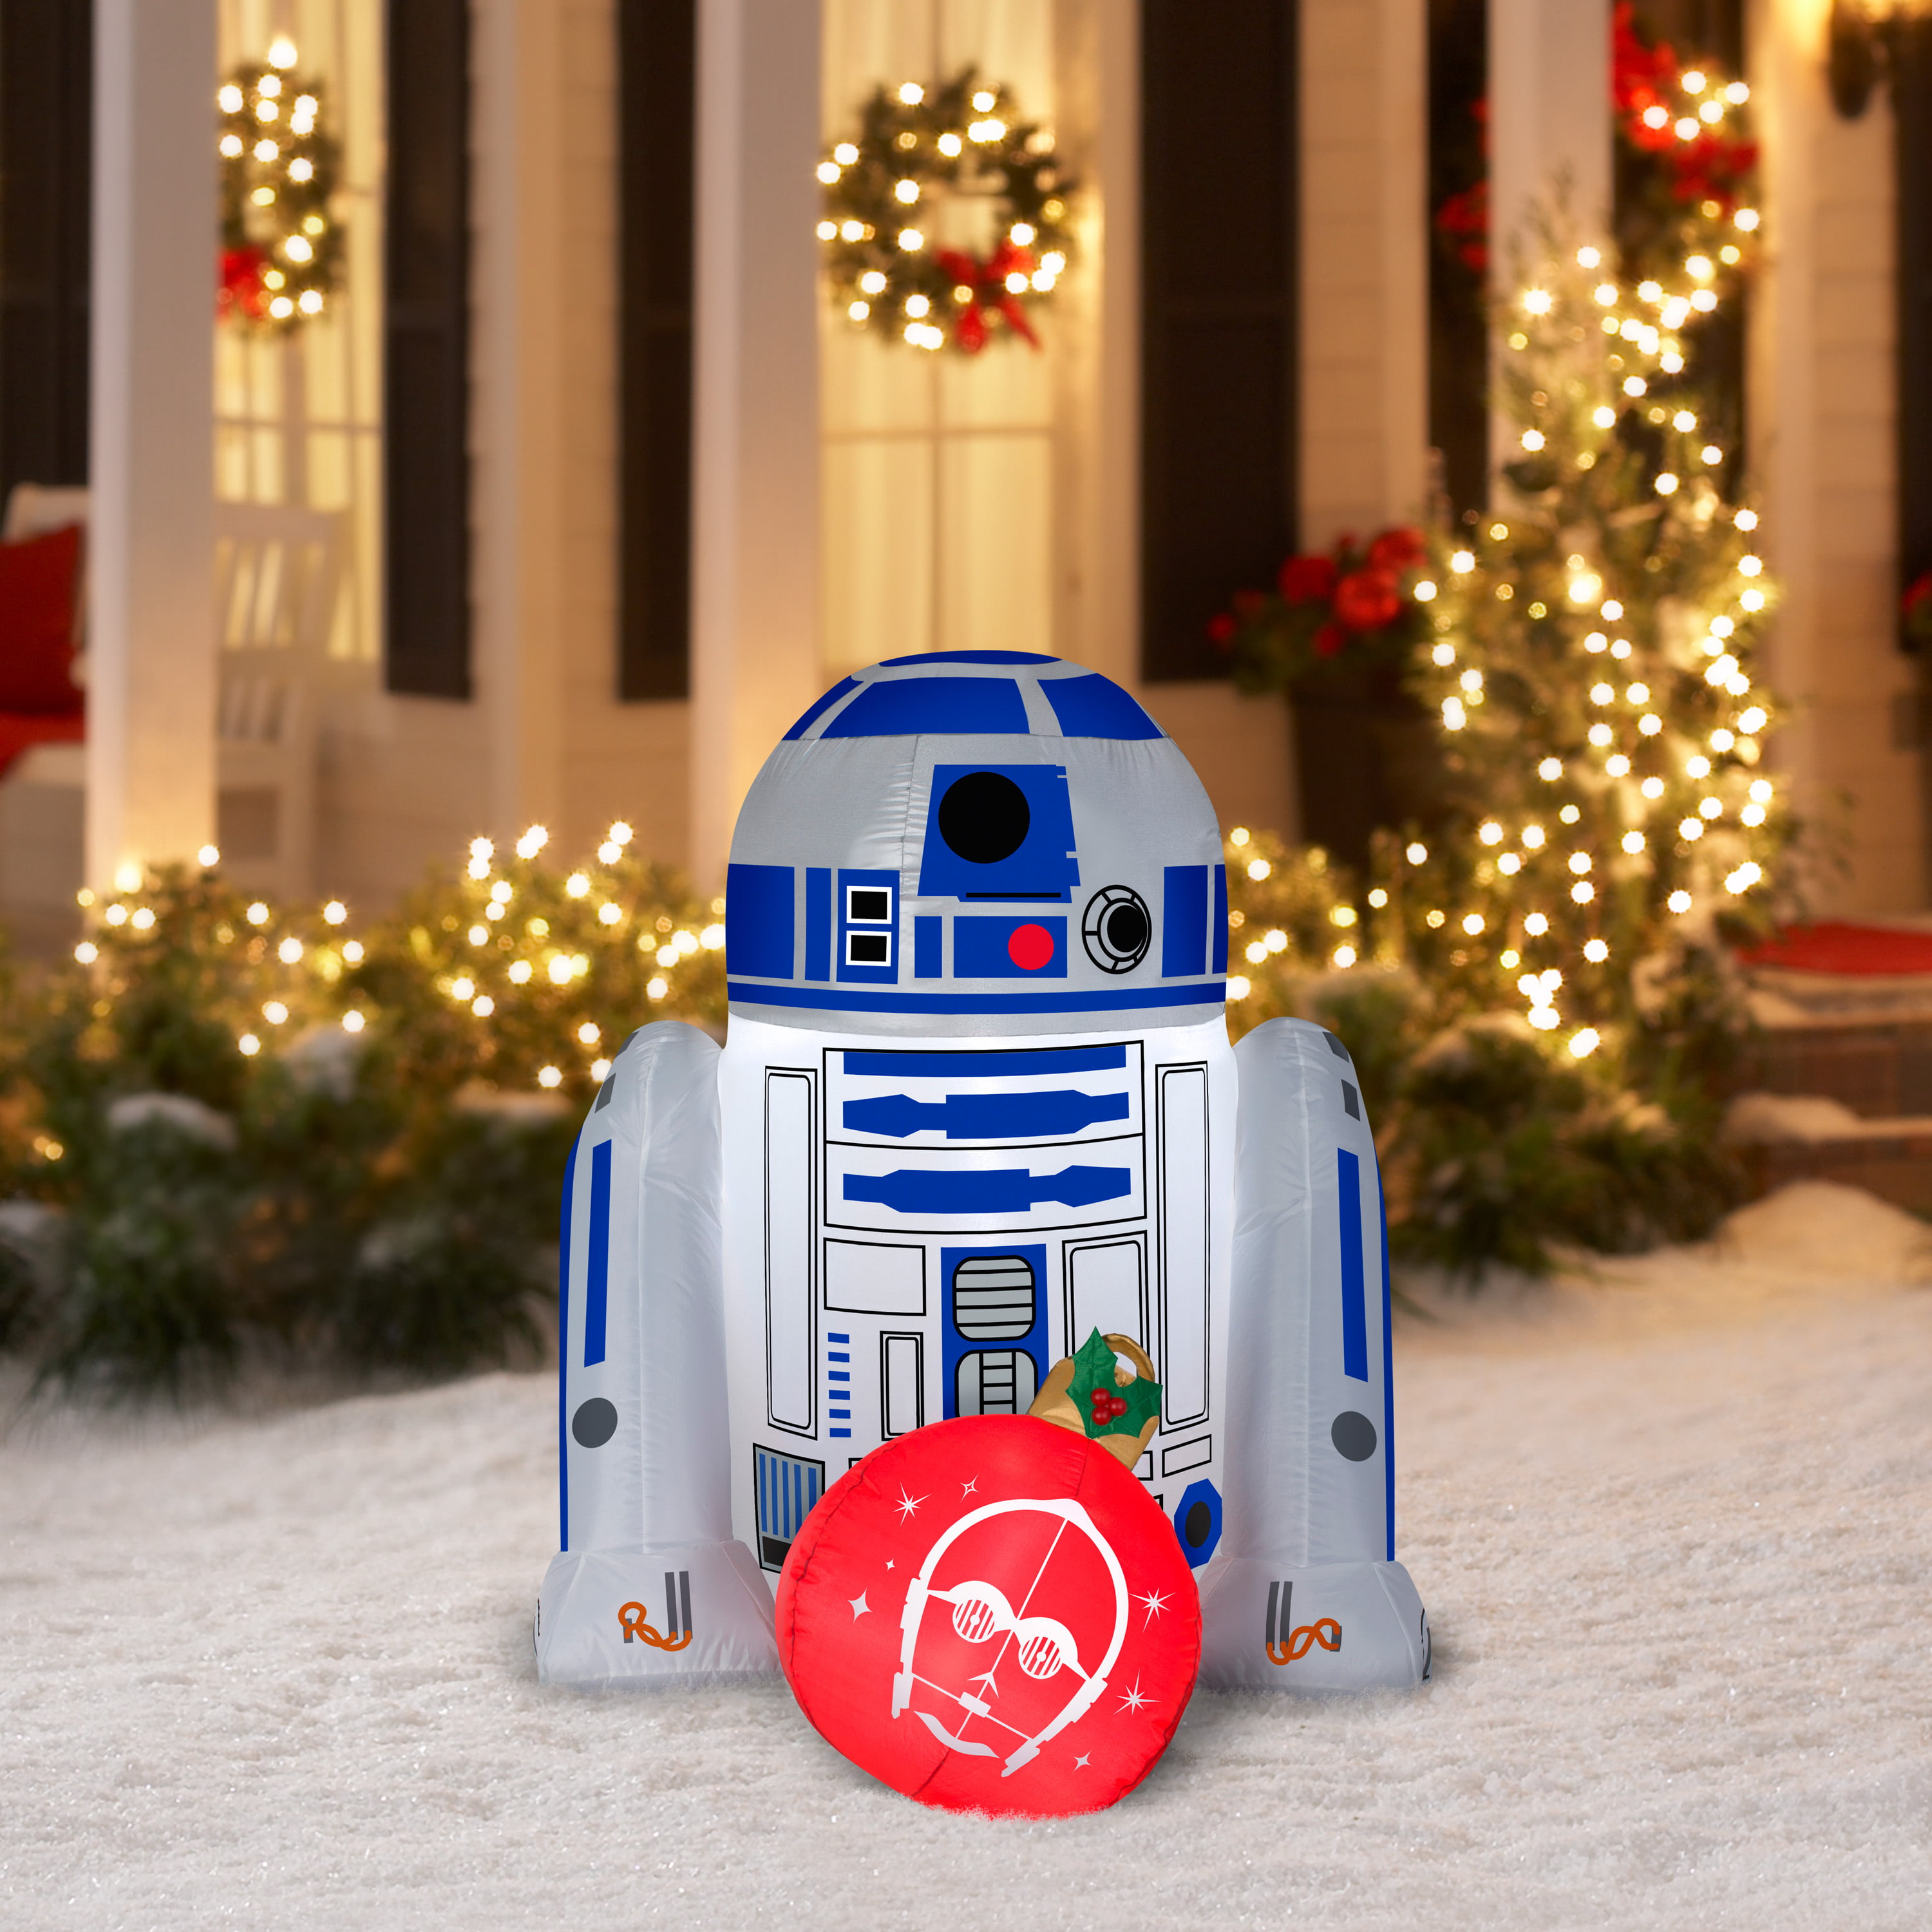 Unique Star Wars Christmas Yard Decorations with Simple Decor